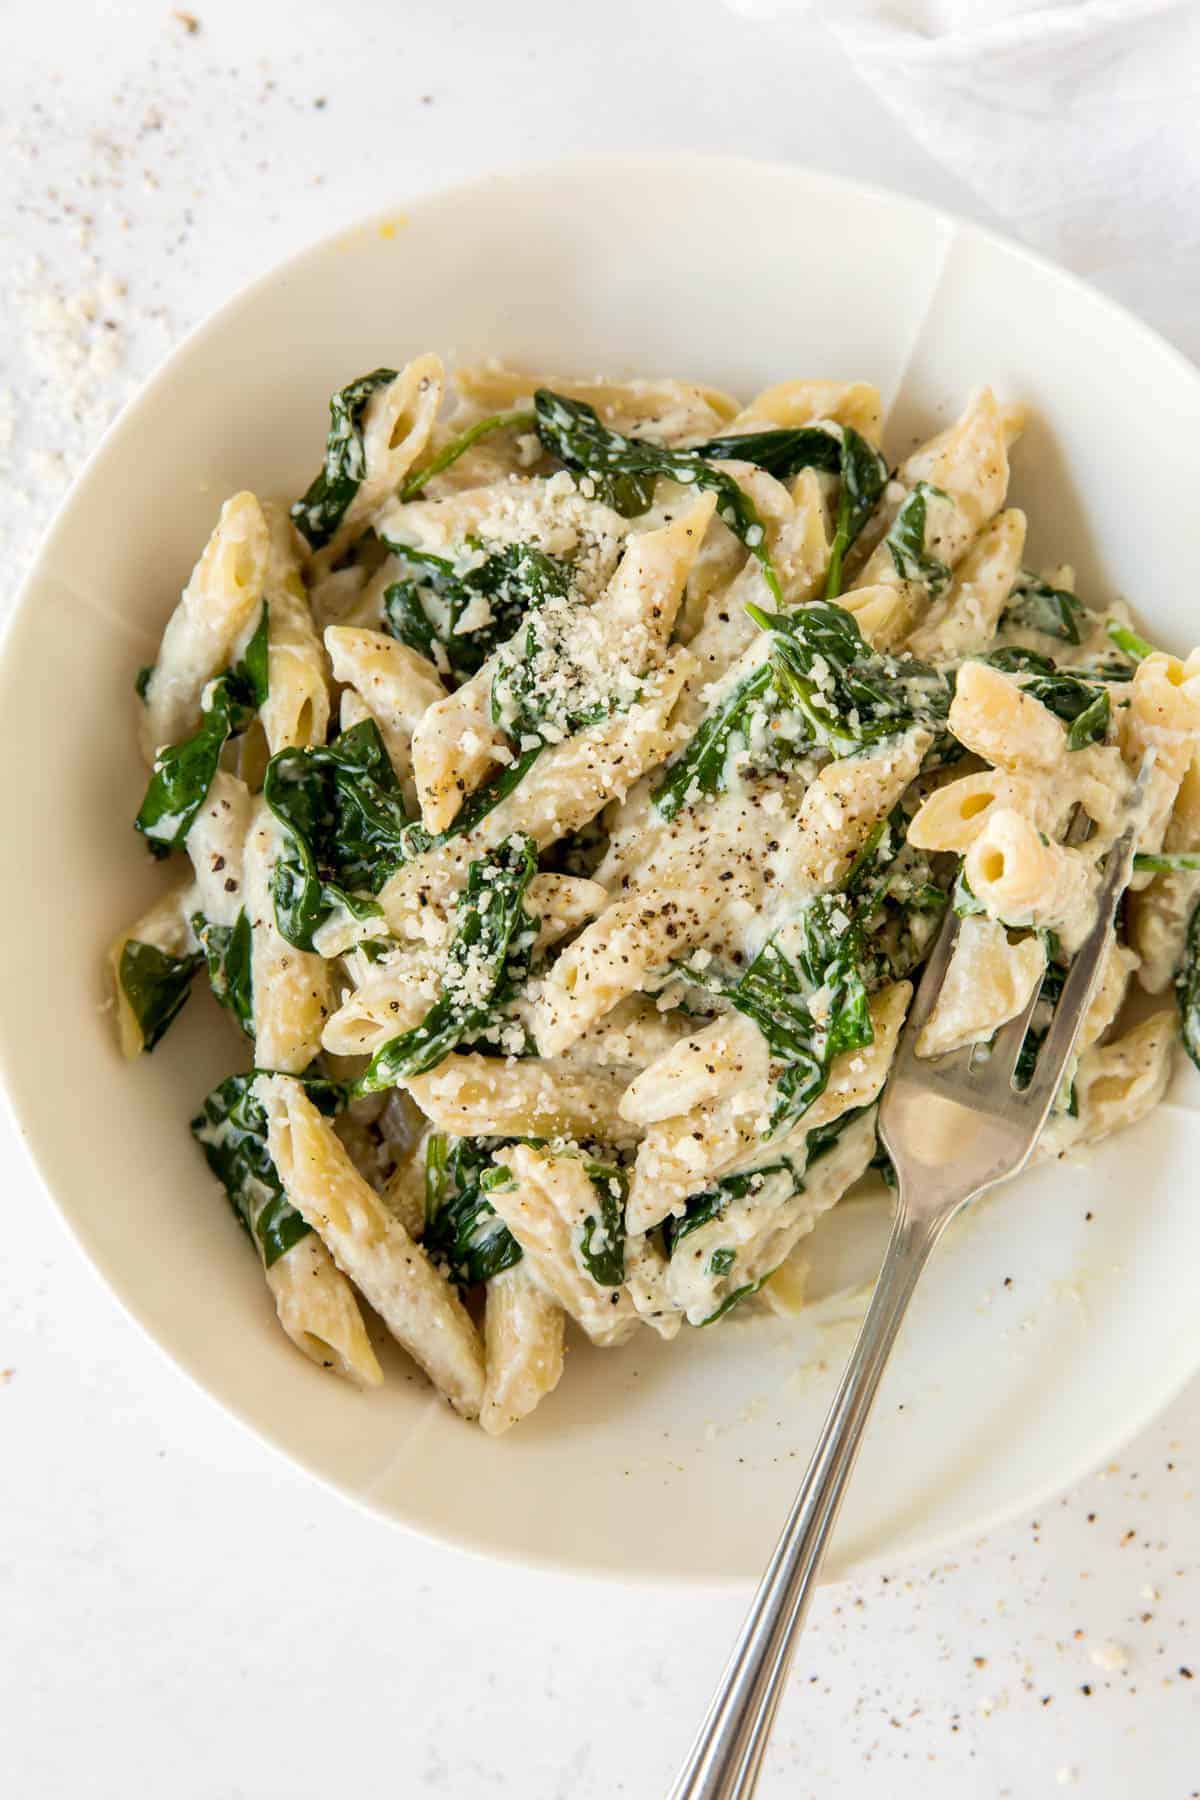 40+ Family Favorite Pasta Recipes - Tried and True!